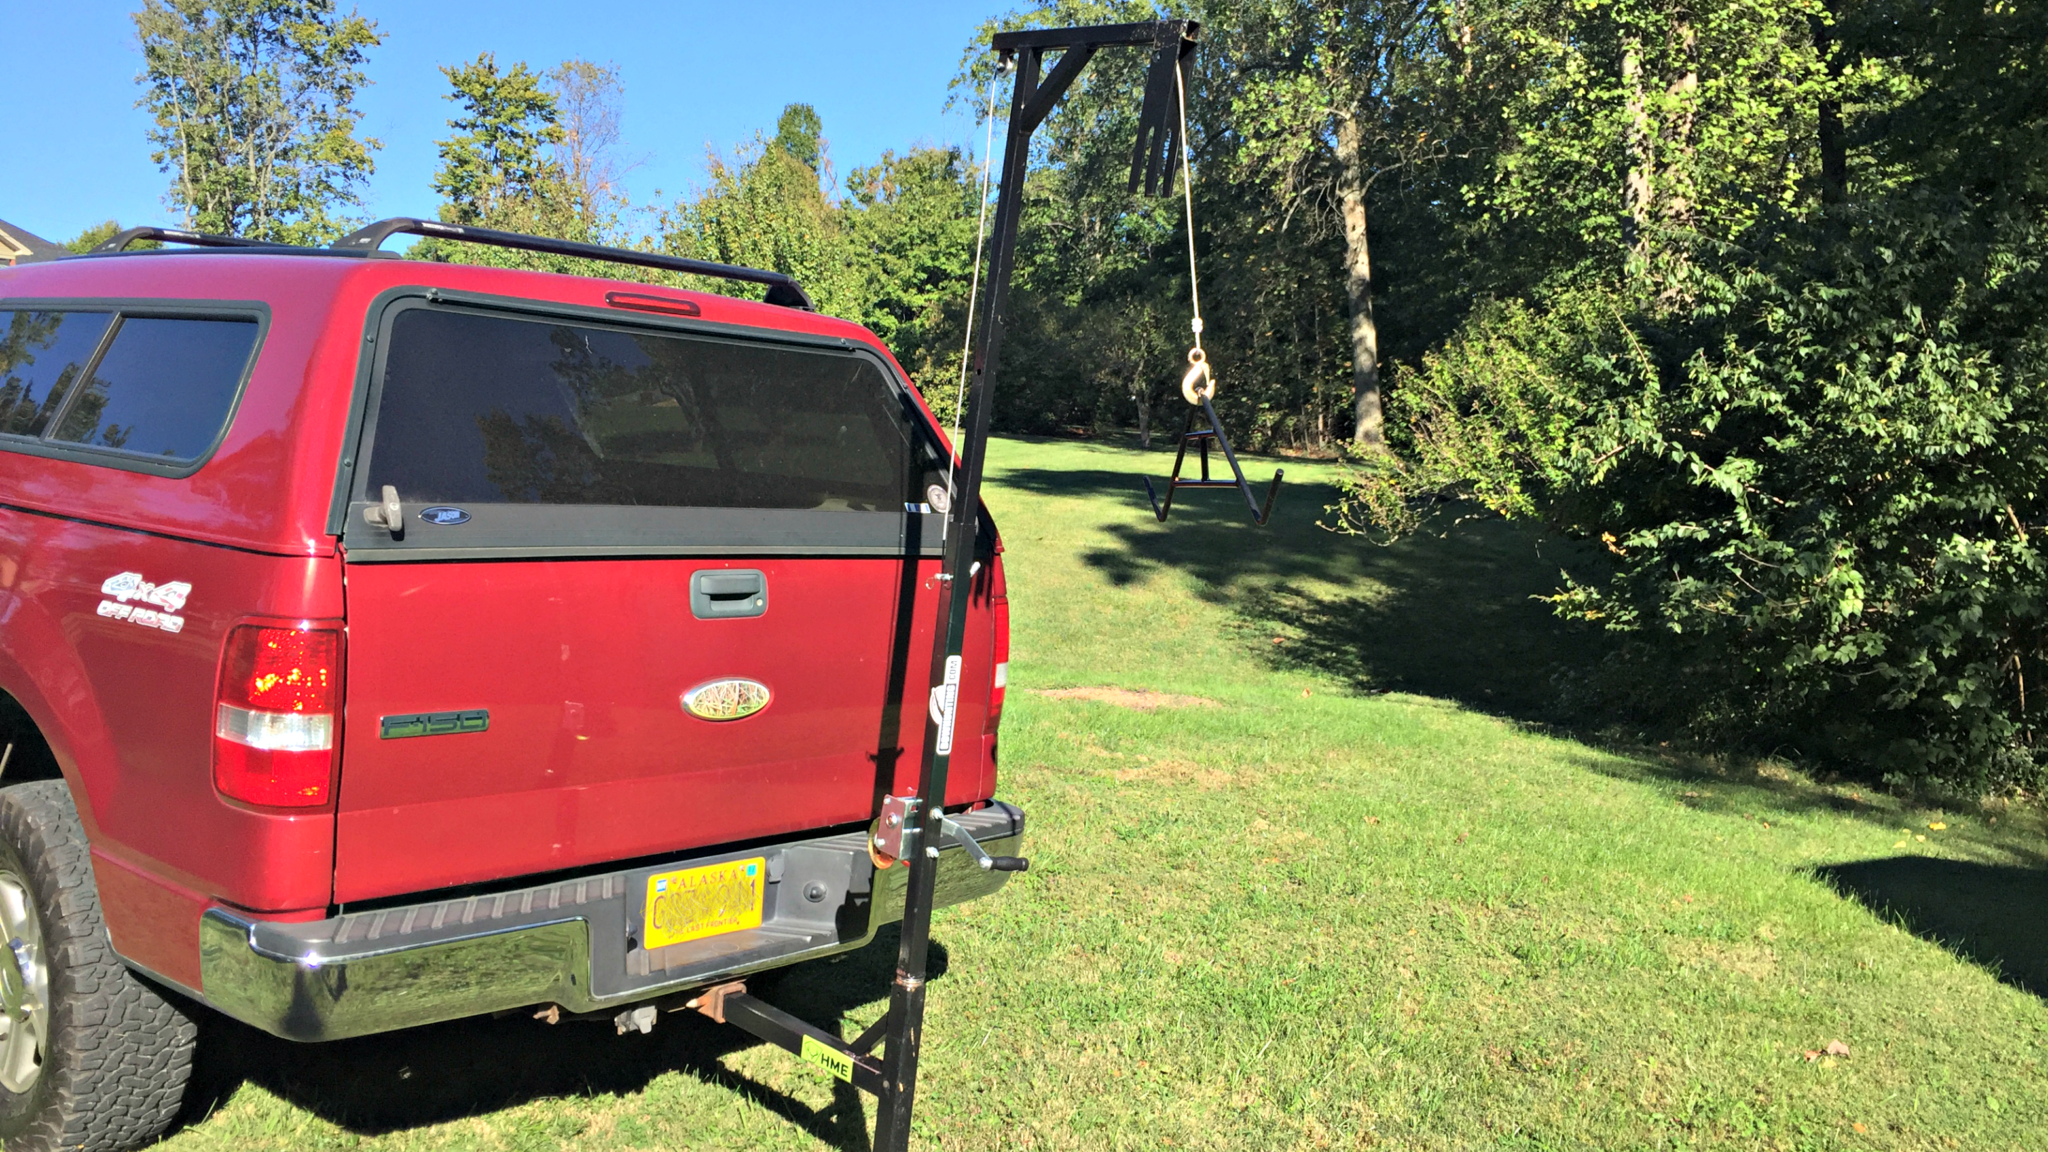 Details about   HME Products HME-HH Truck Hitch Deer Hunting Game Hoist w/Winch & Gambrel NEW 